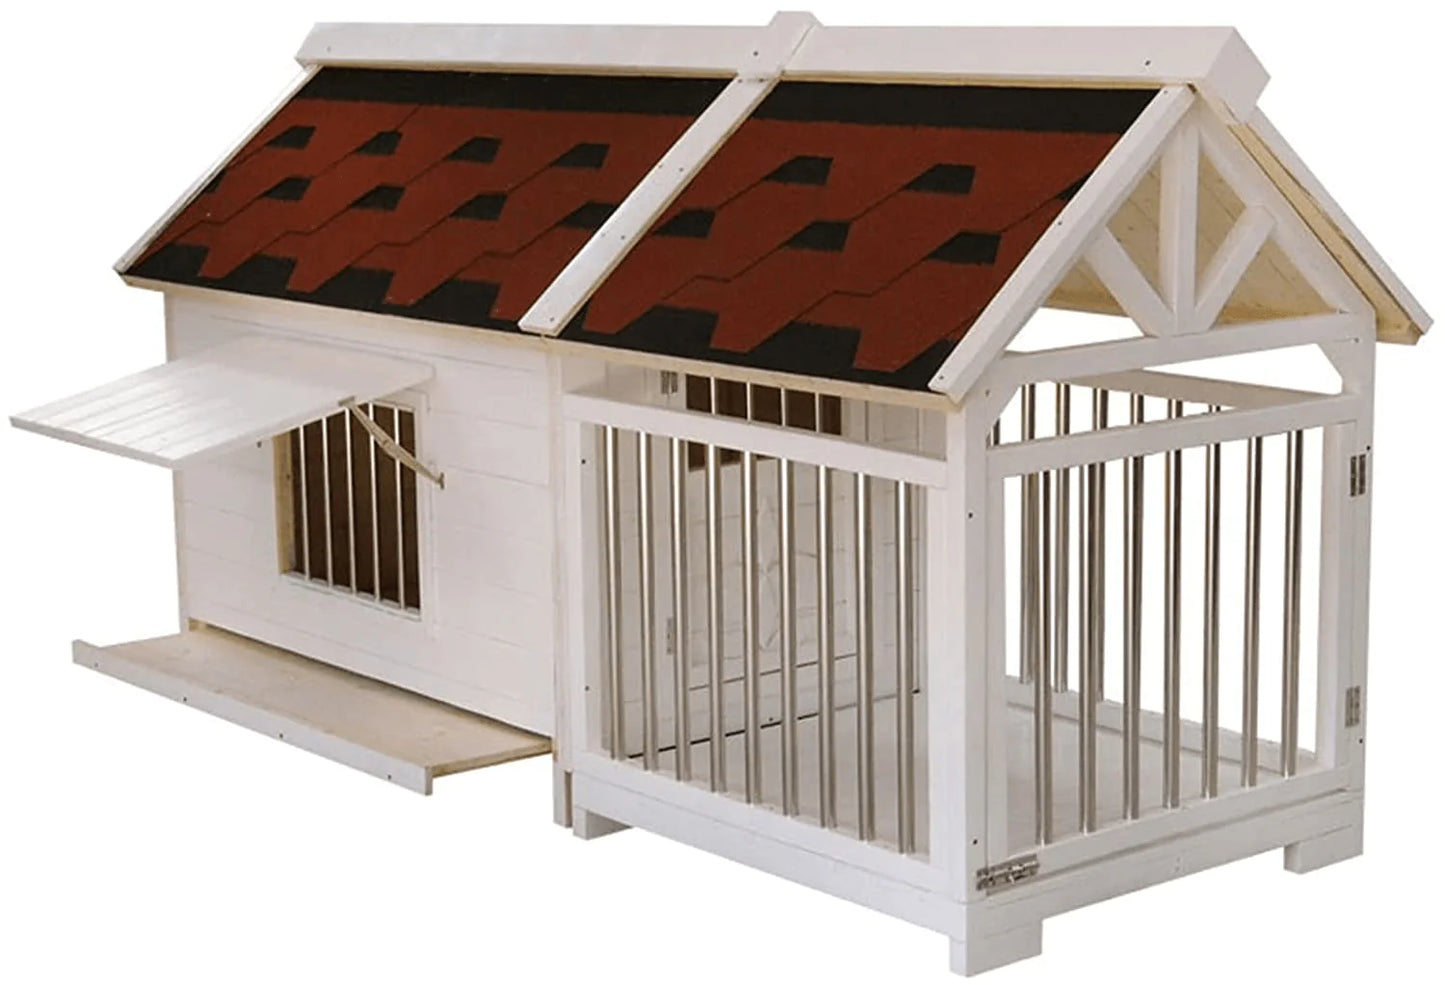 ZYBCRR Wood Dog Houses for Dogs,Weatherproof outside Dog Houses Outdoor Solid Wood Dog House Rainproof and Anticorrosive Medium Wooden Dog Houses